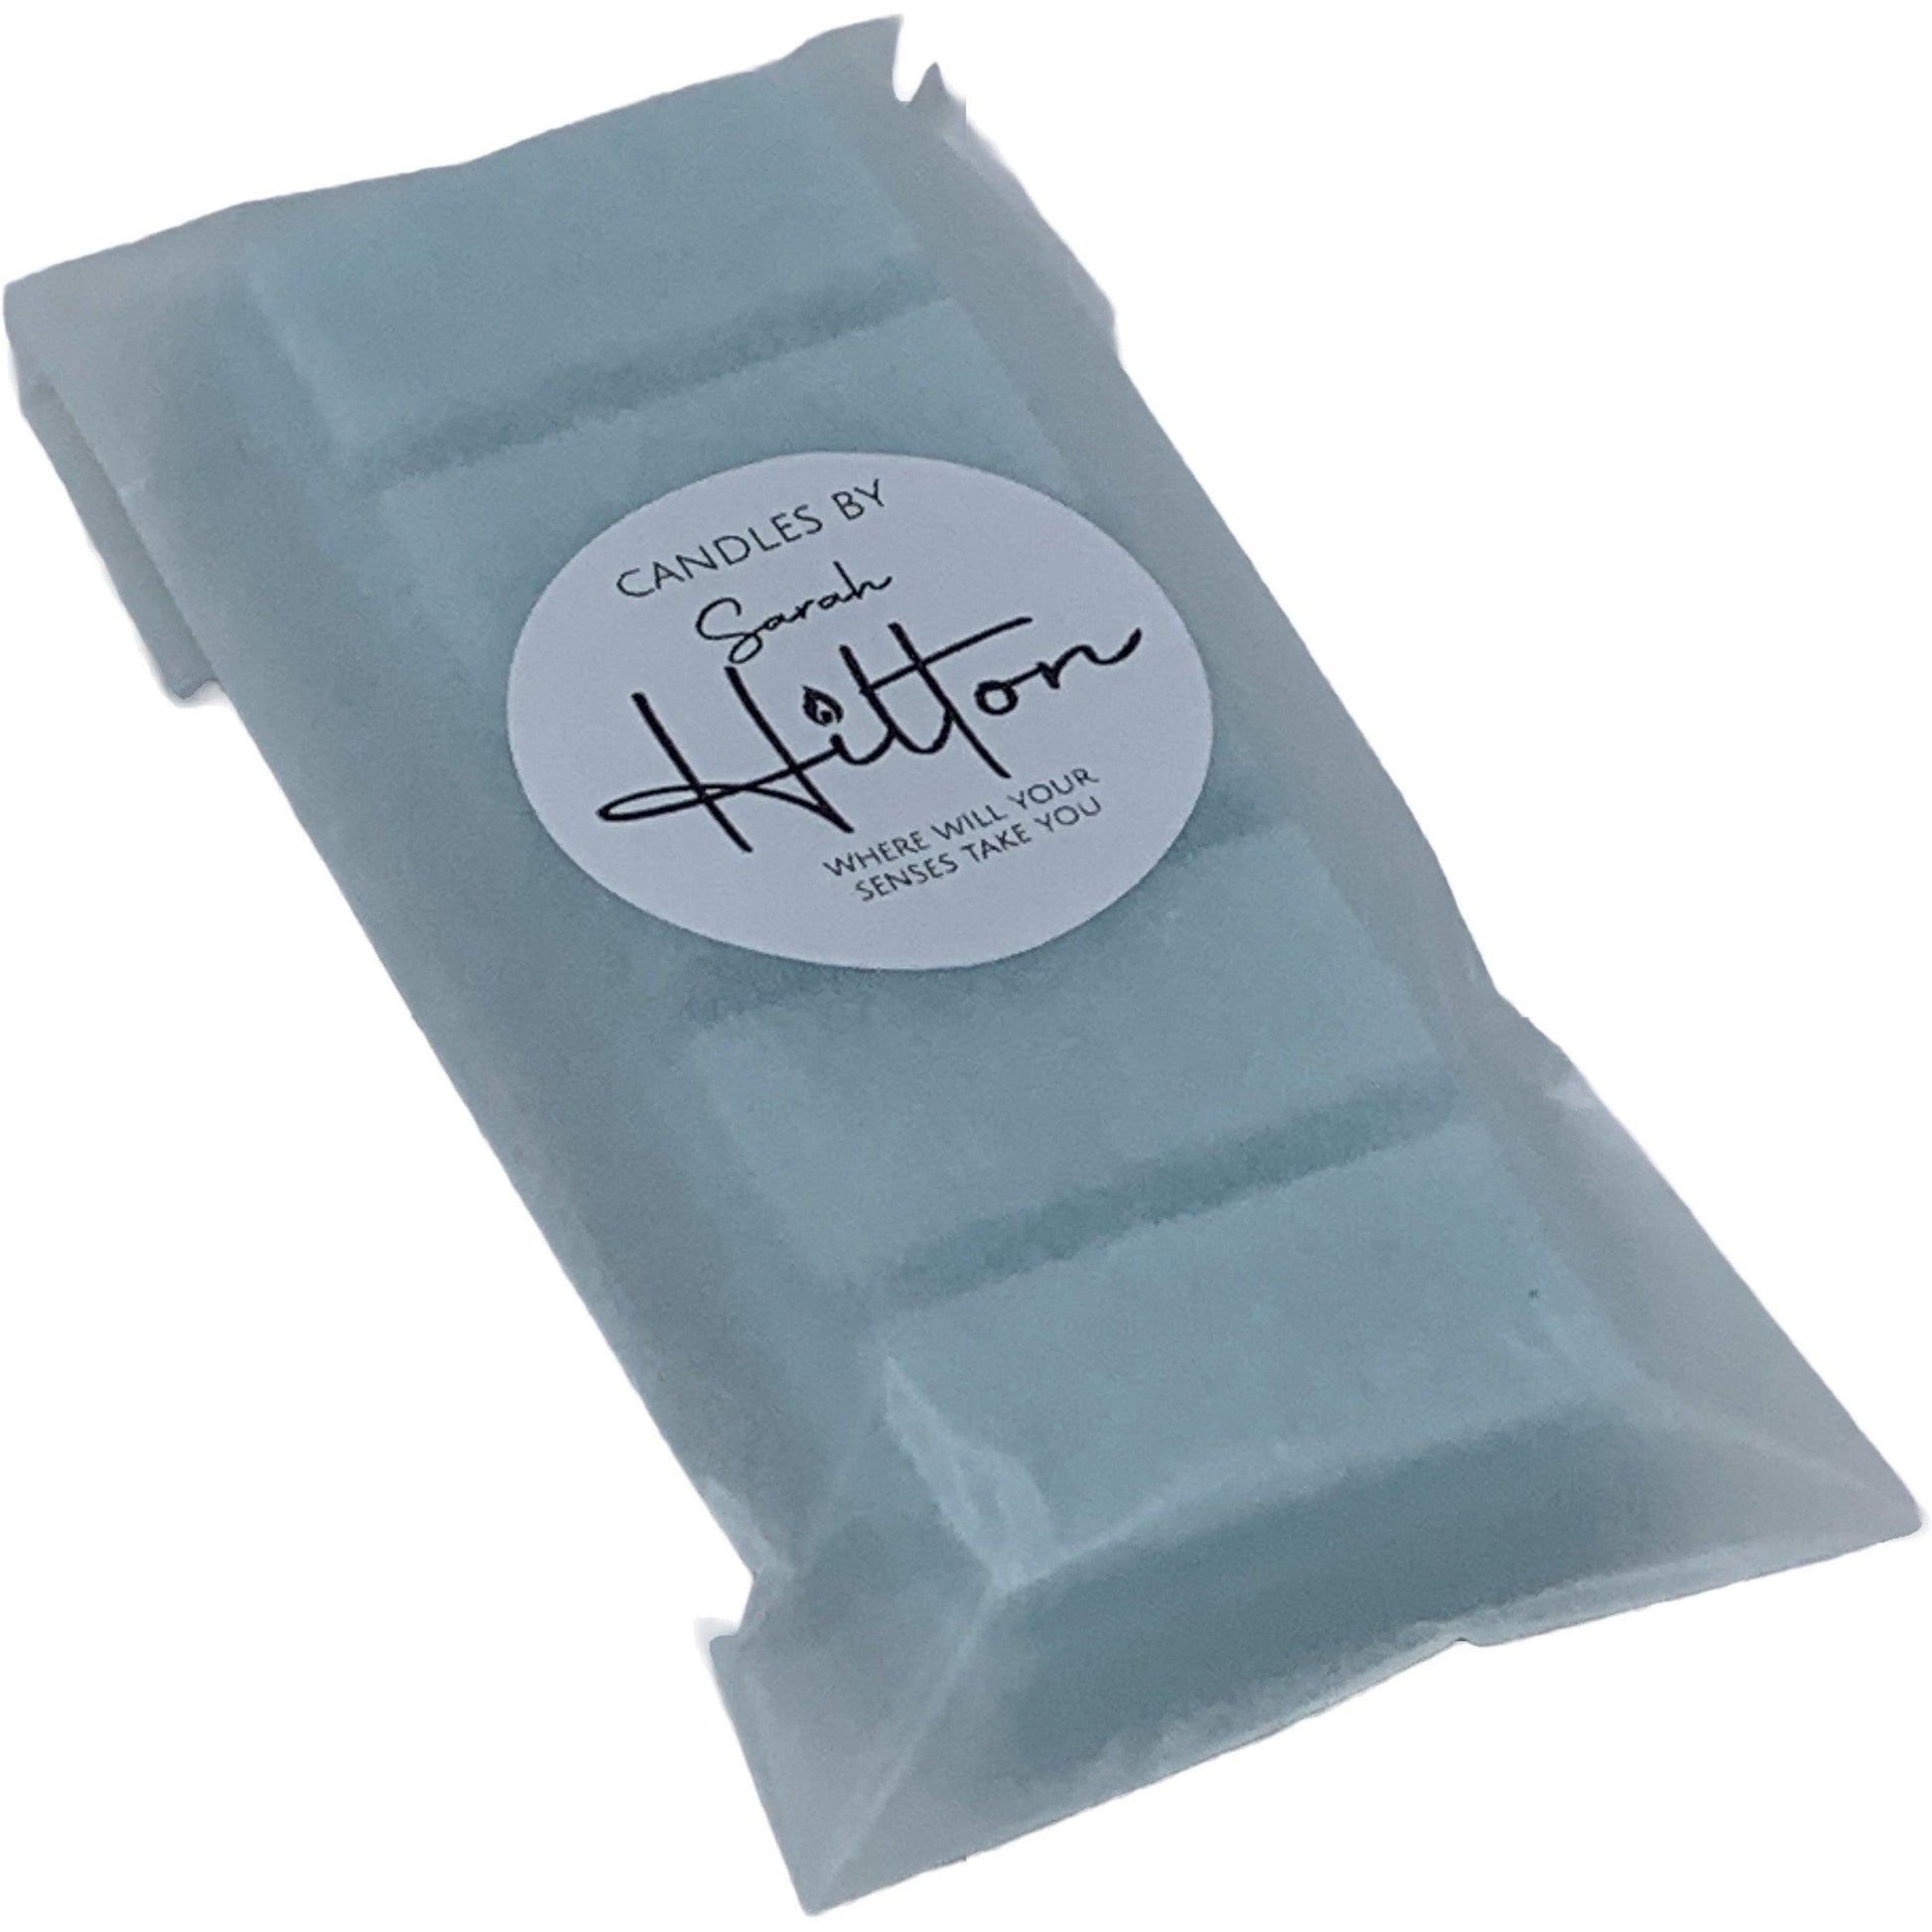 Fluffy Towels Wax Melt - Scents By Sarah Hilton